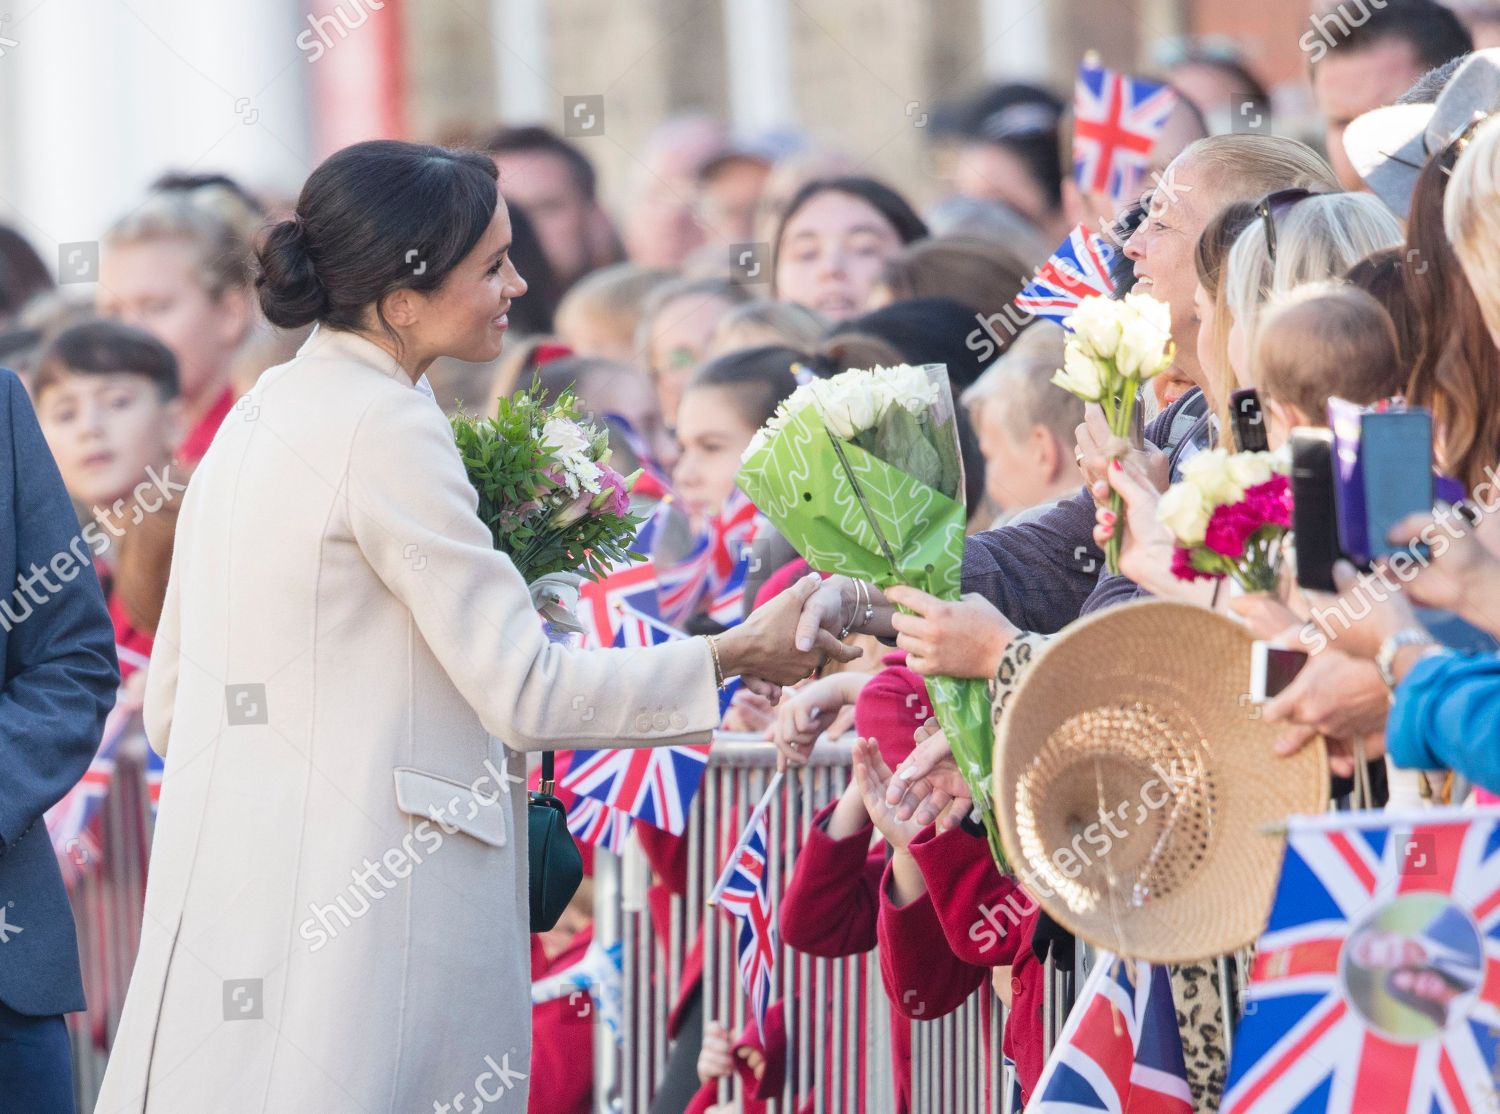 prince-harry-and-meghan-duchess-of-sussex-visit-to-sussex-uk-shutterstock-editorial-9912893h.jpg